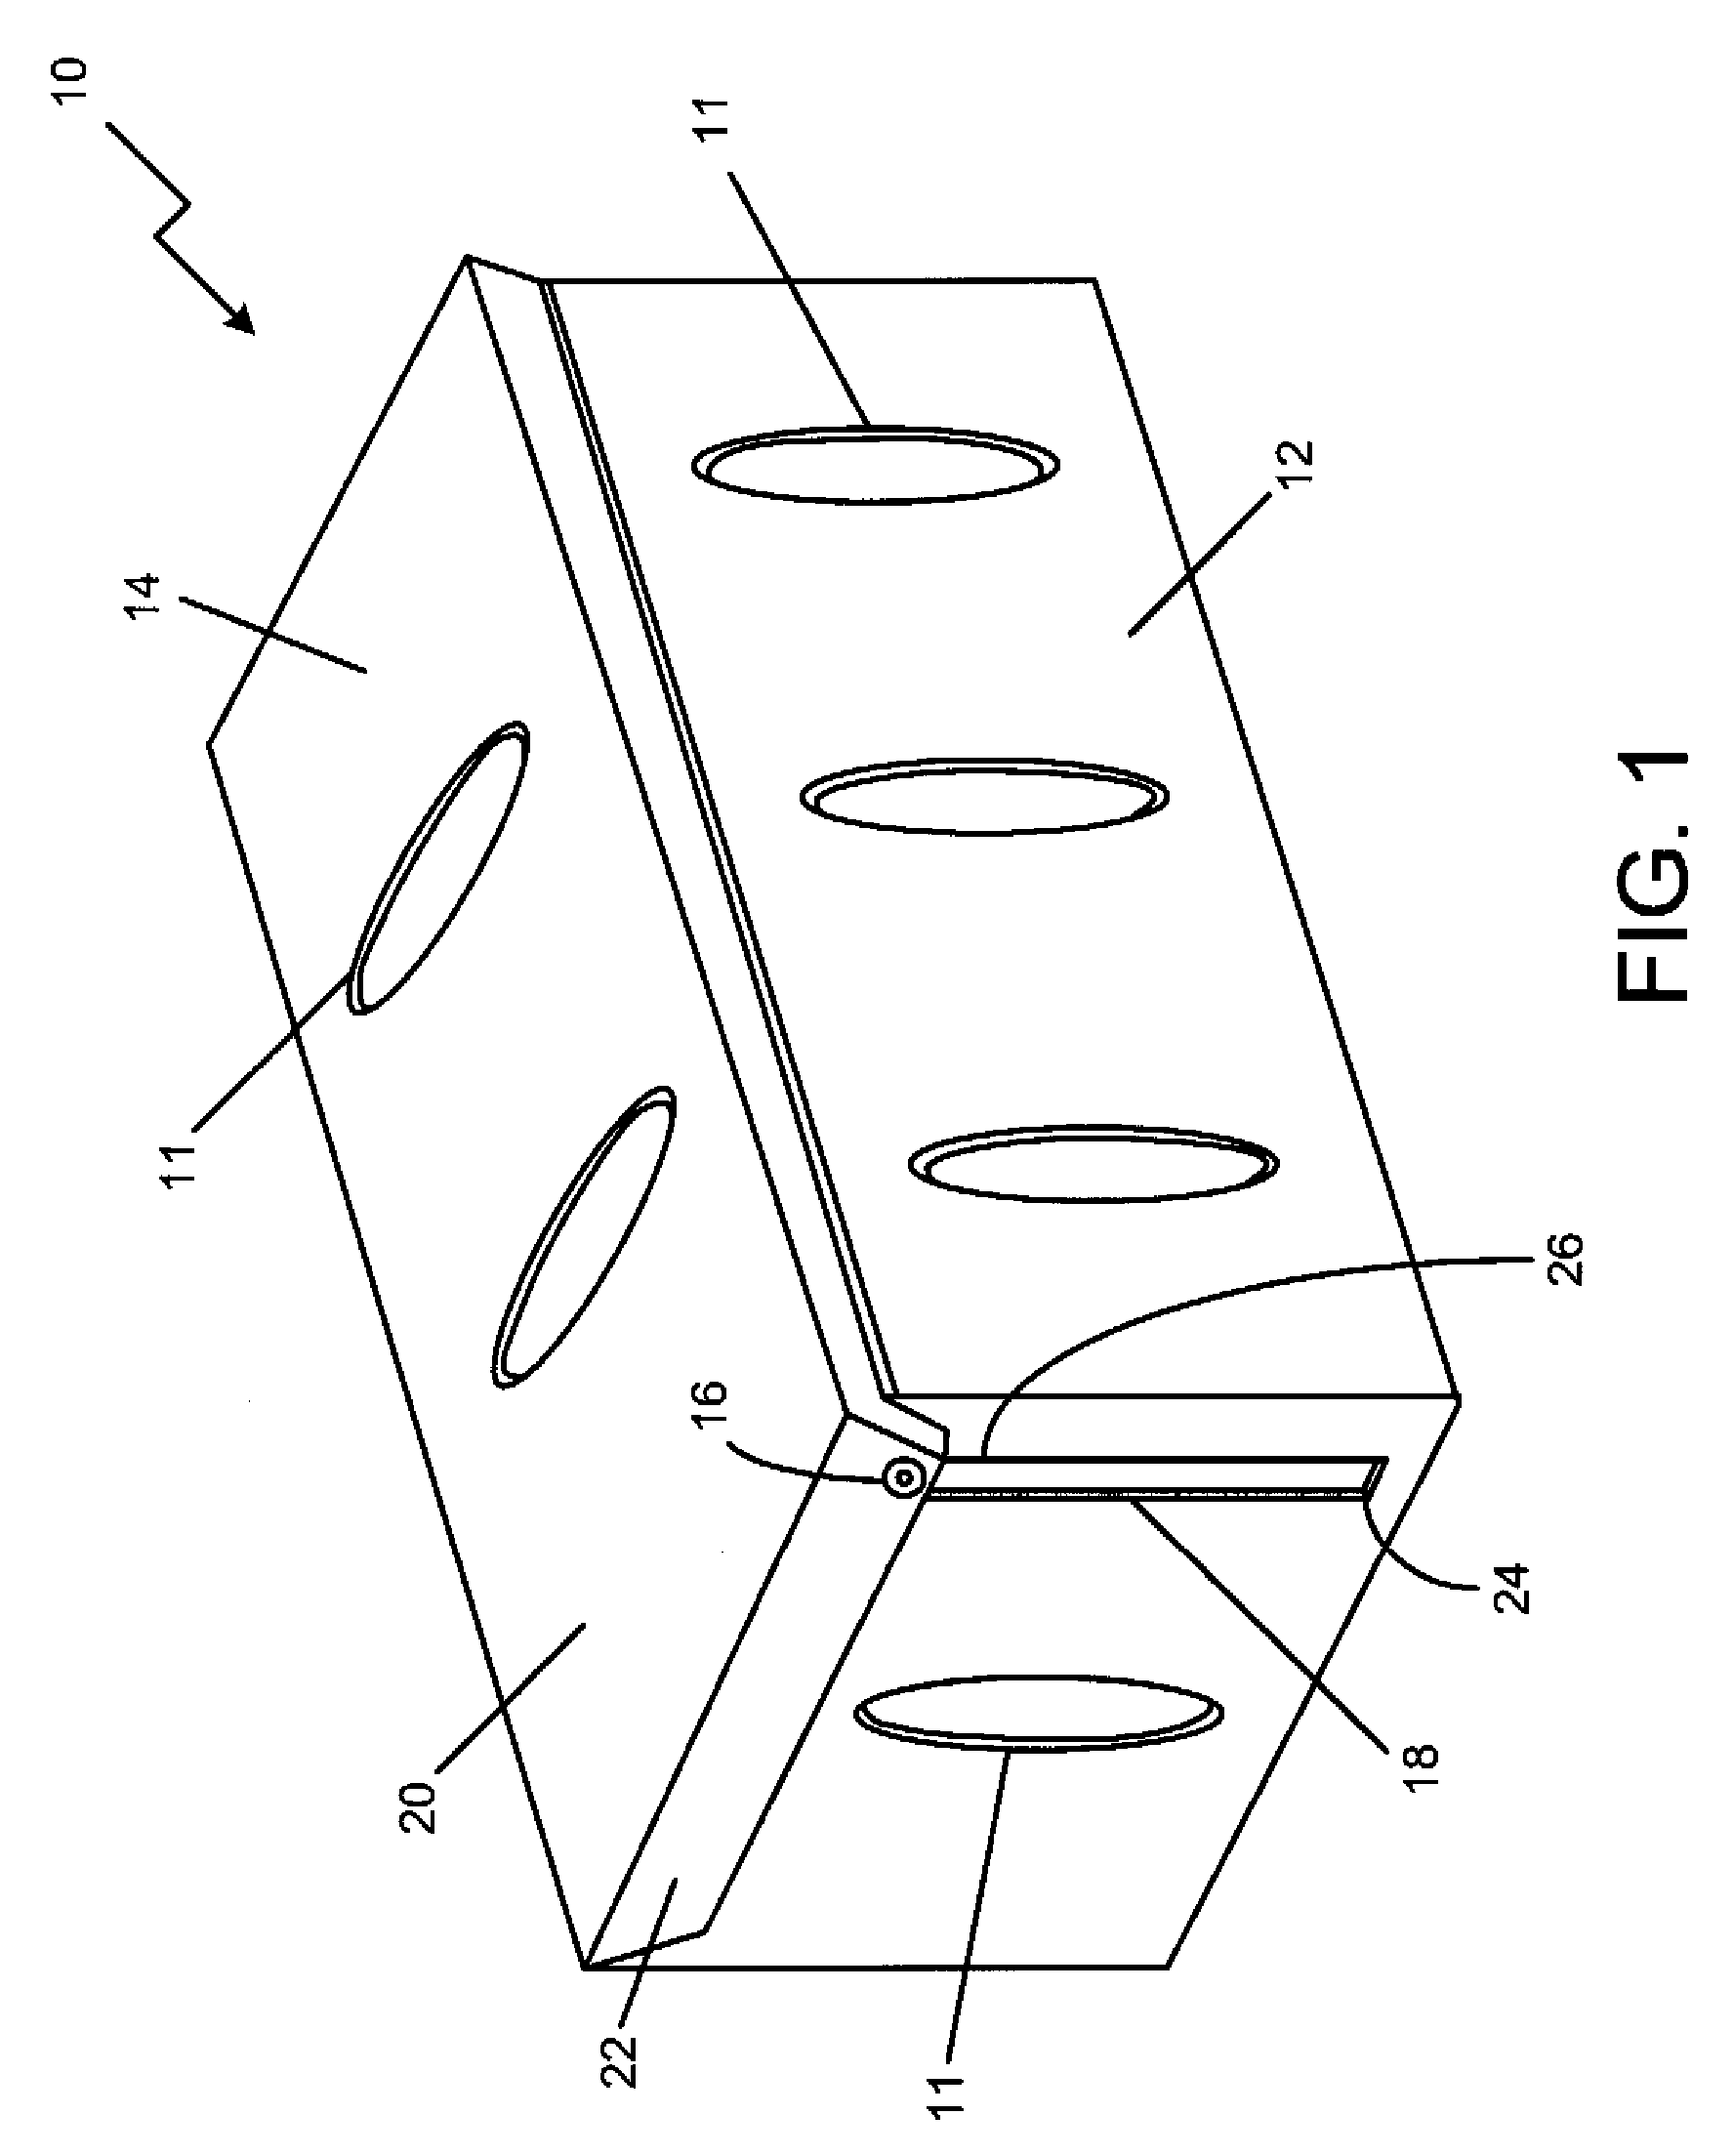 System and method for medical instrument sterilization case having a rotatably displacing cover